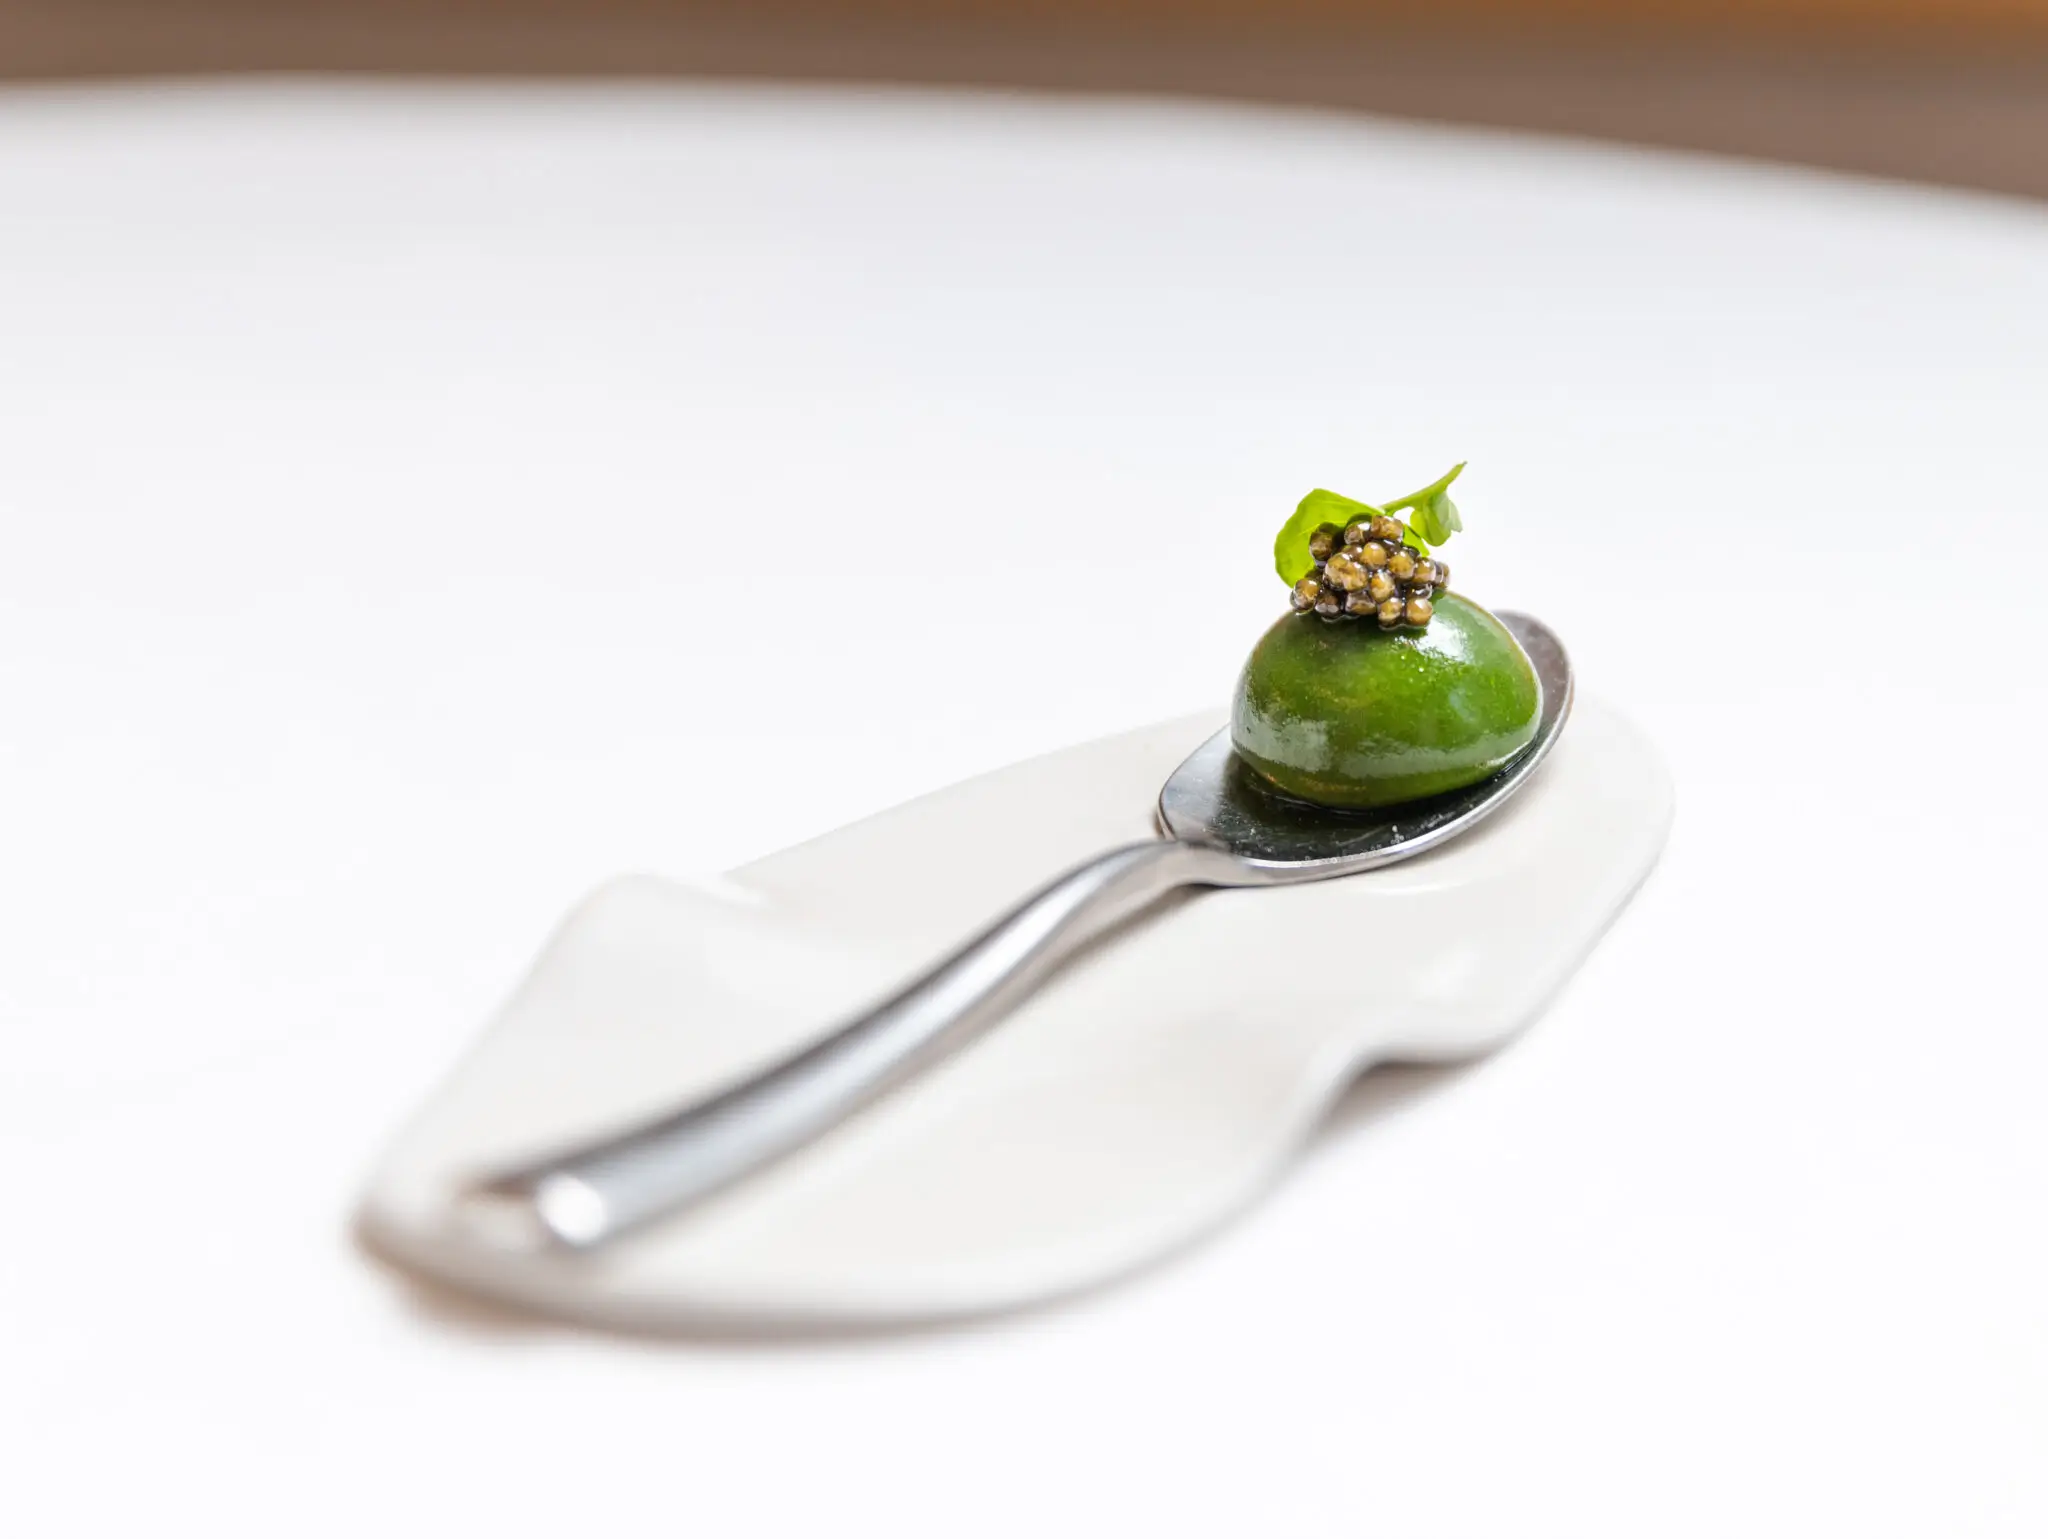 A sophisticated appetizer at Alliance in Paris, featuring a vibrant green watercress amuse-bouche topped with caviar, presented on a sleek spoon – a testament to the affordable luxury of Michelin-star dining.